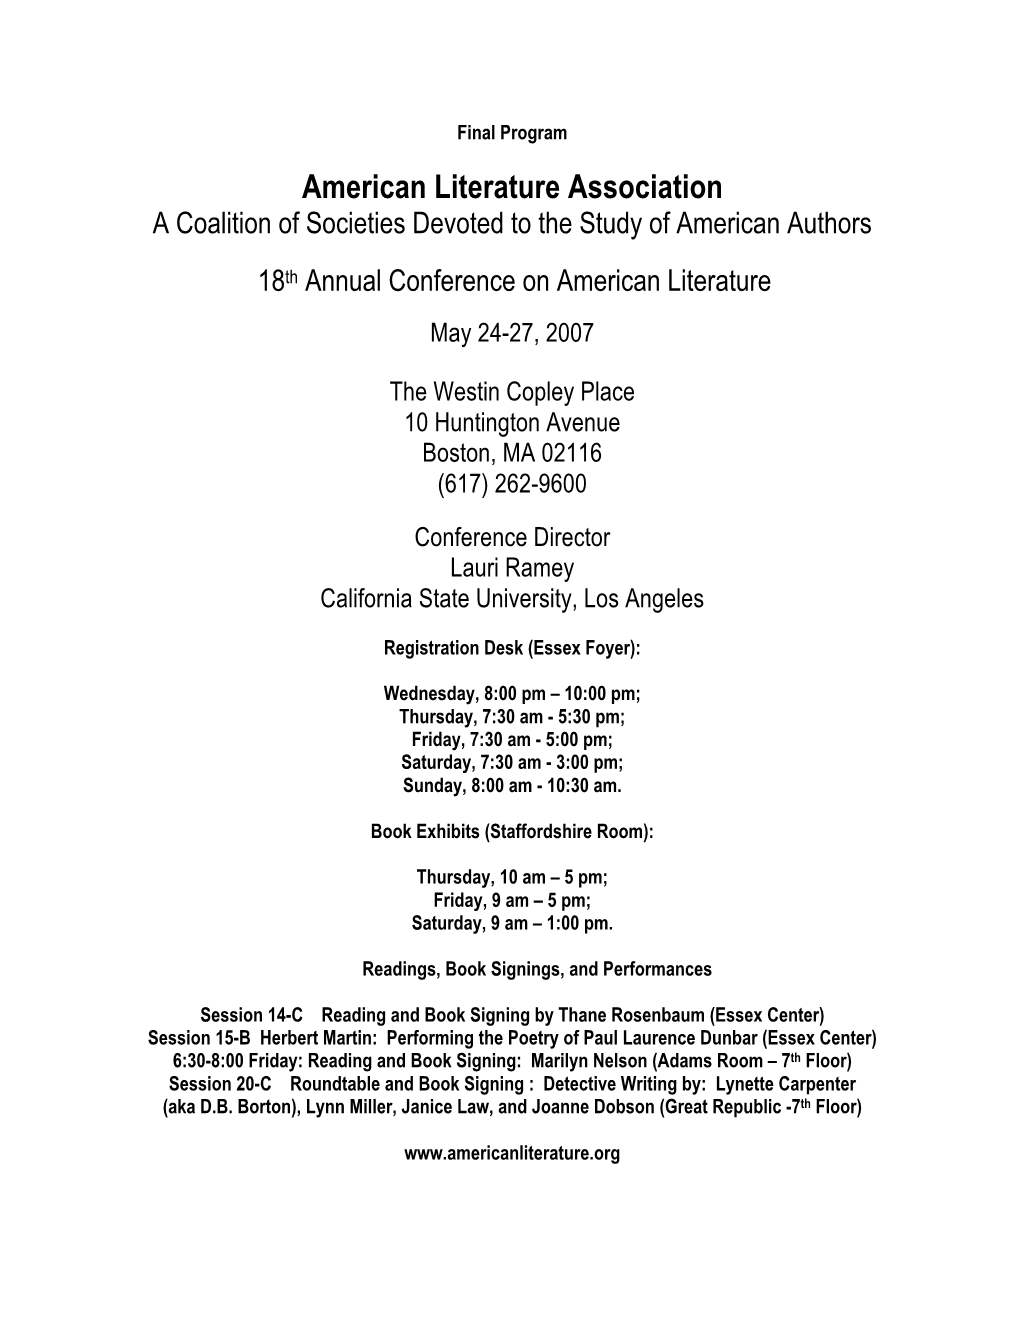 American Literature Association a Coalition of Societies Devoted to the Study of American Authors